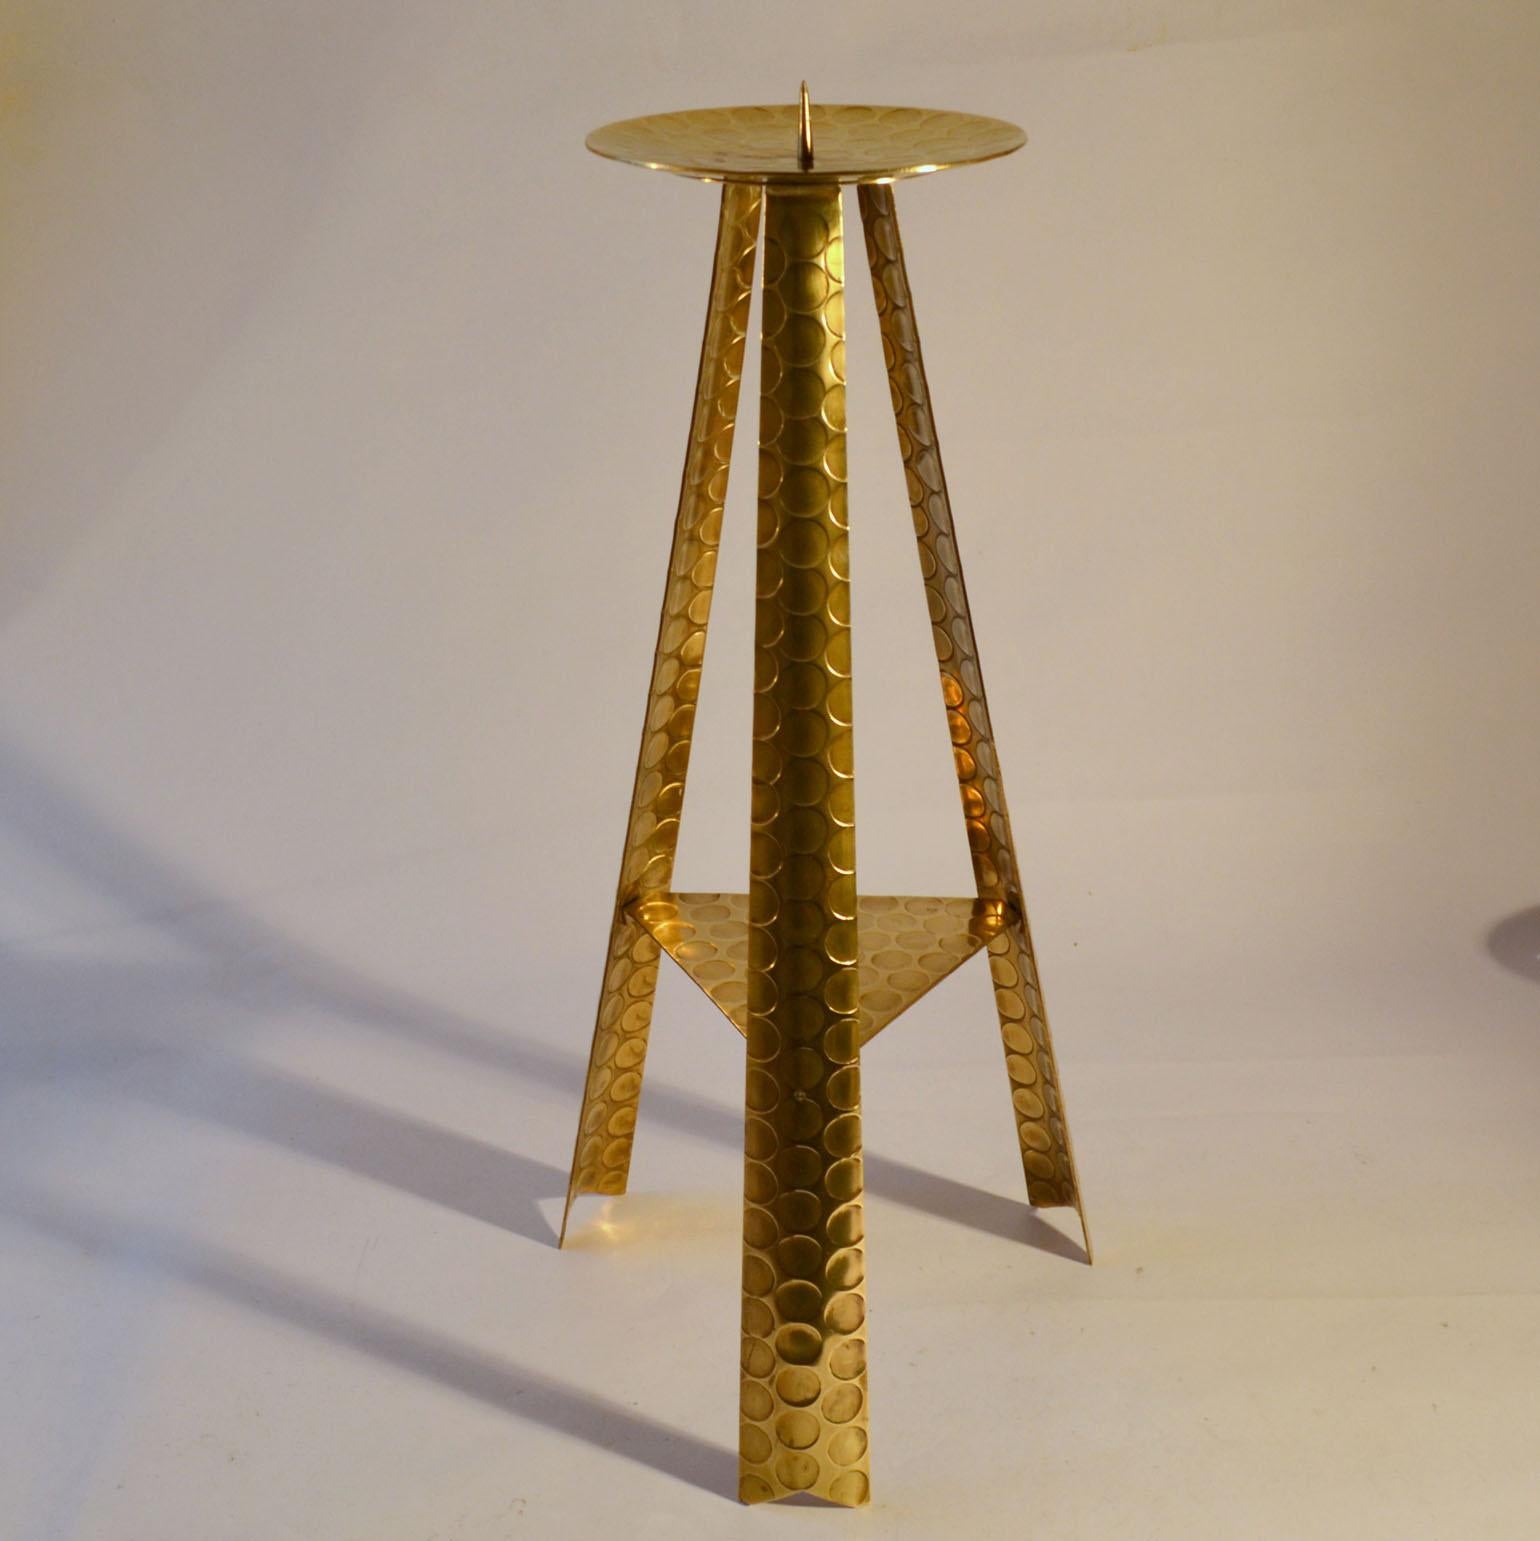 Large 1950's floor candle holder handcrafted in brass with stamped circle pattern surface for pillar candles. Possible designed for a church altar. Dimensions are without the candles. 
Dimensions are without the candles.
The candle will be included.